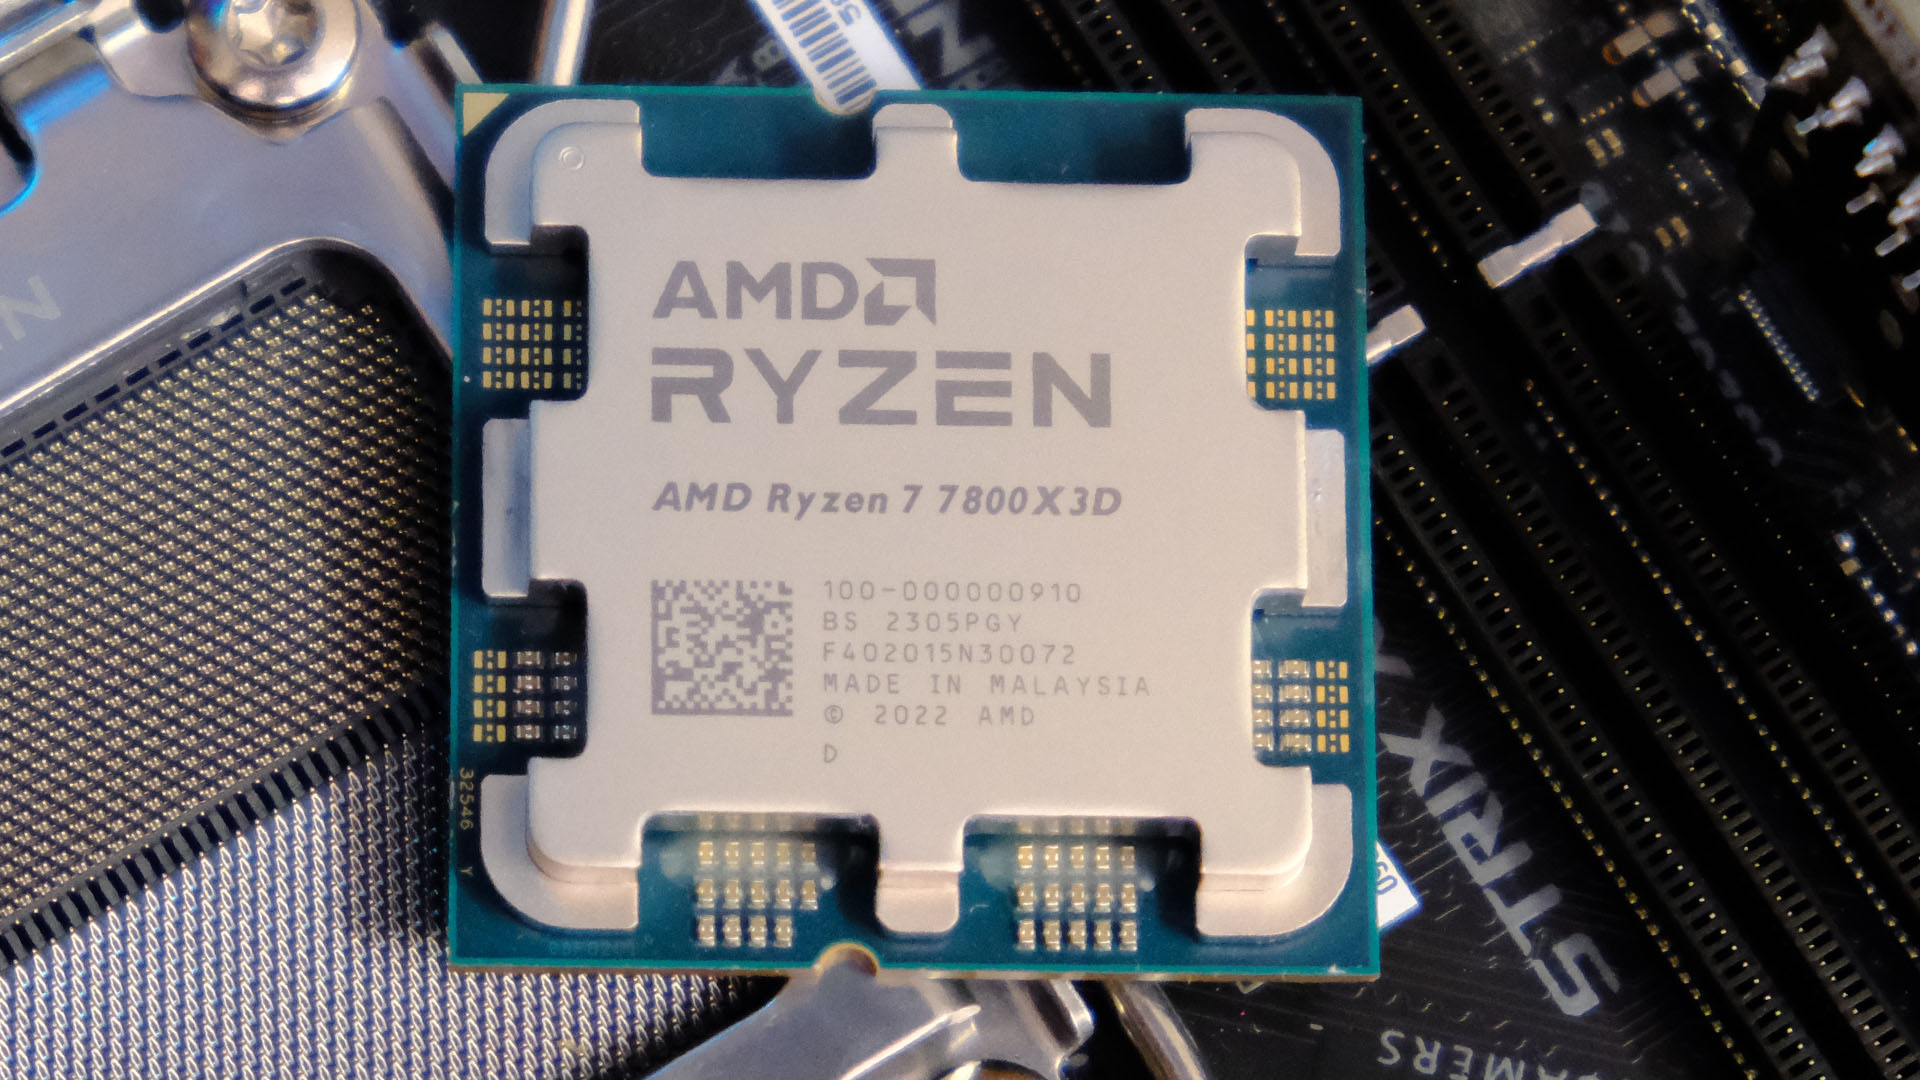 I've reviewed a ton of PC components over the past 12 months but AMD's  Ryzen 7 7800X3D is my pick of the year